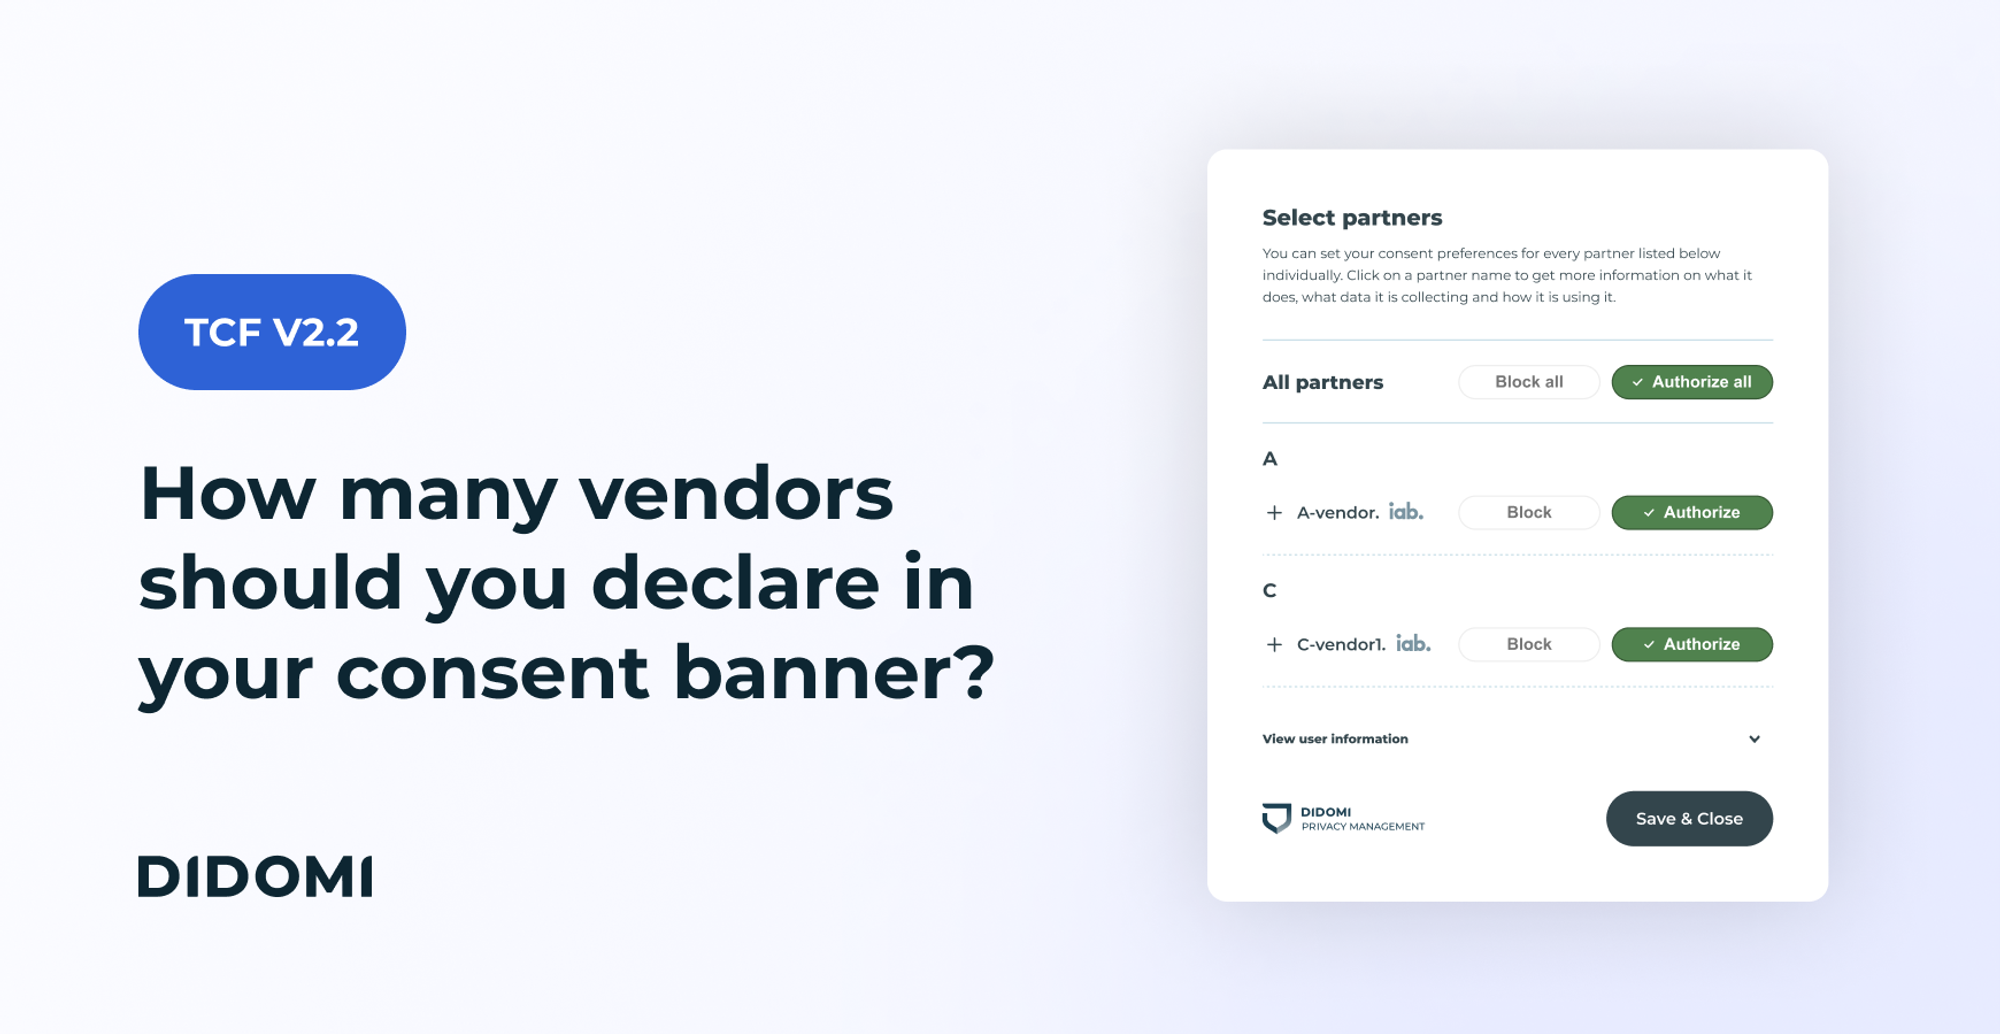 A mockup of a consent banner with some vendors listed out, and the mention "TCF v2.2", with the title How many vendors should you declare?"